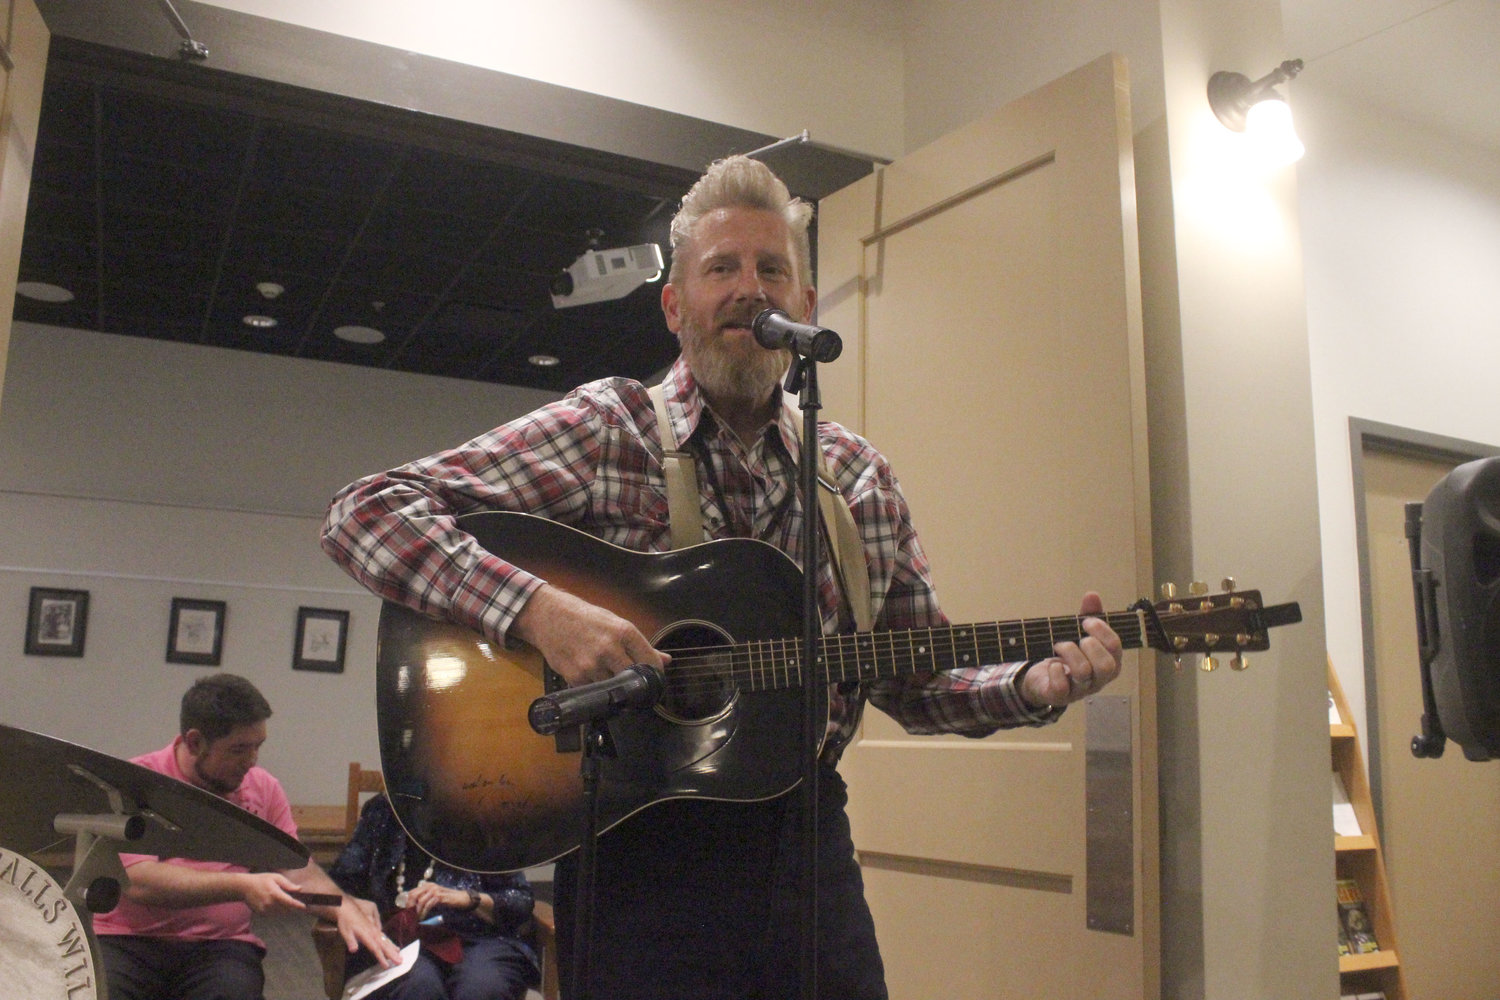 Rory Feek plays one of two songs during the Laura Ingalls Wilder Children’s Literature Awards Ceremony at the museum on Nov. 3. He sang “That’s Important to Me” and  “A Little More Country Than That.”